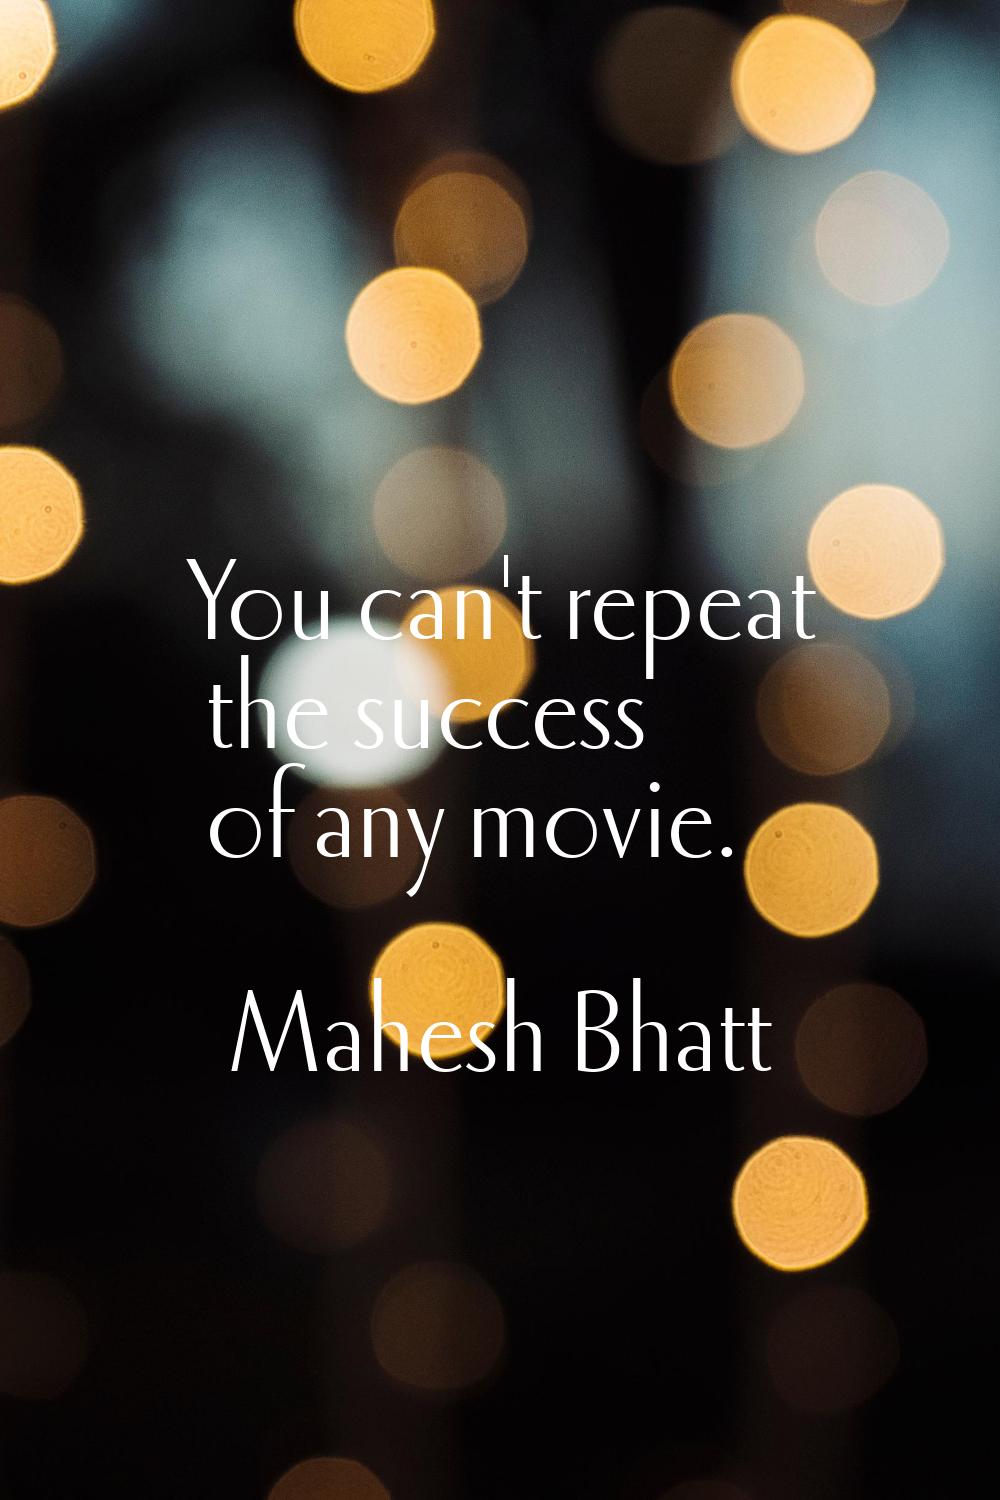 You can't repeat the success of any movie.